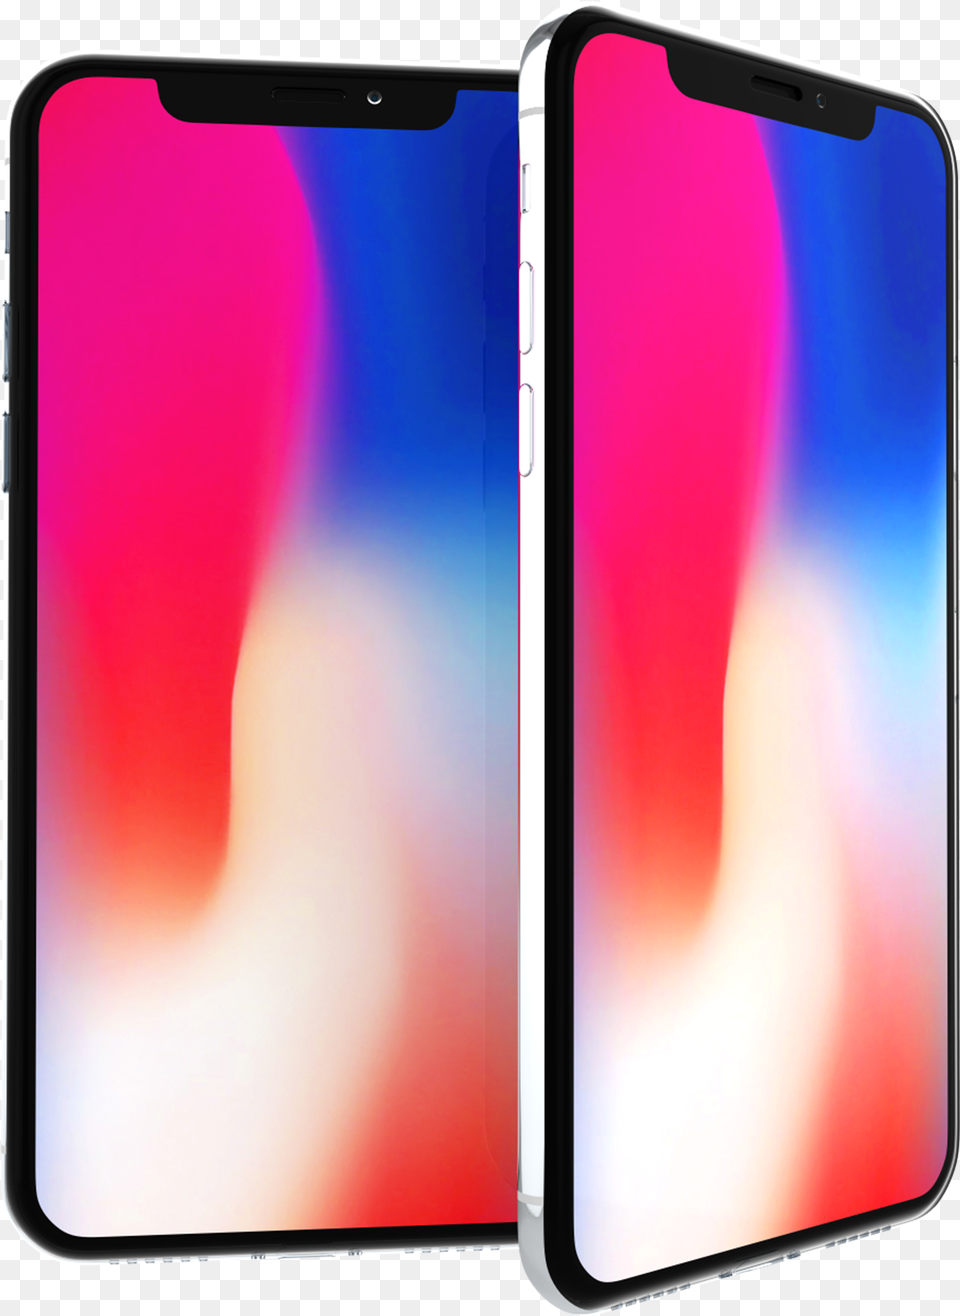 Apple Iphone X Free Iphone X Png